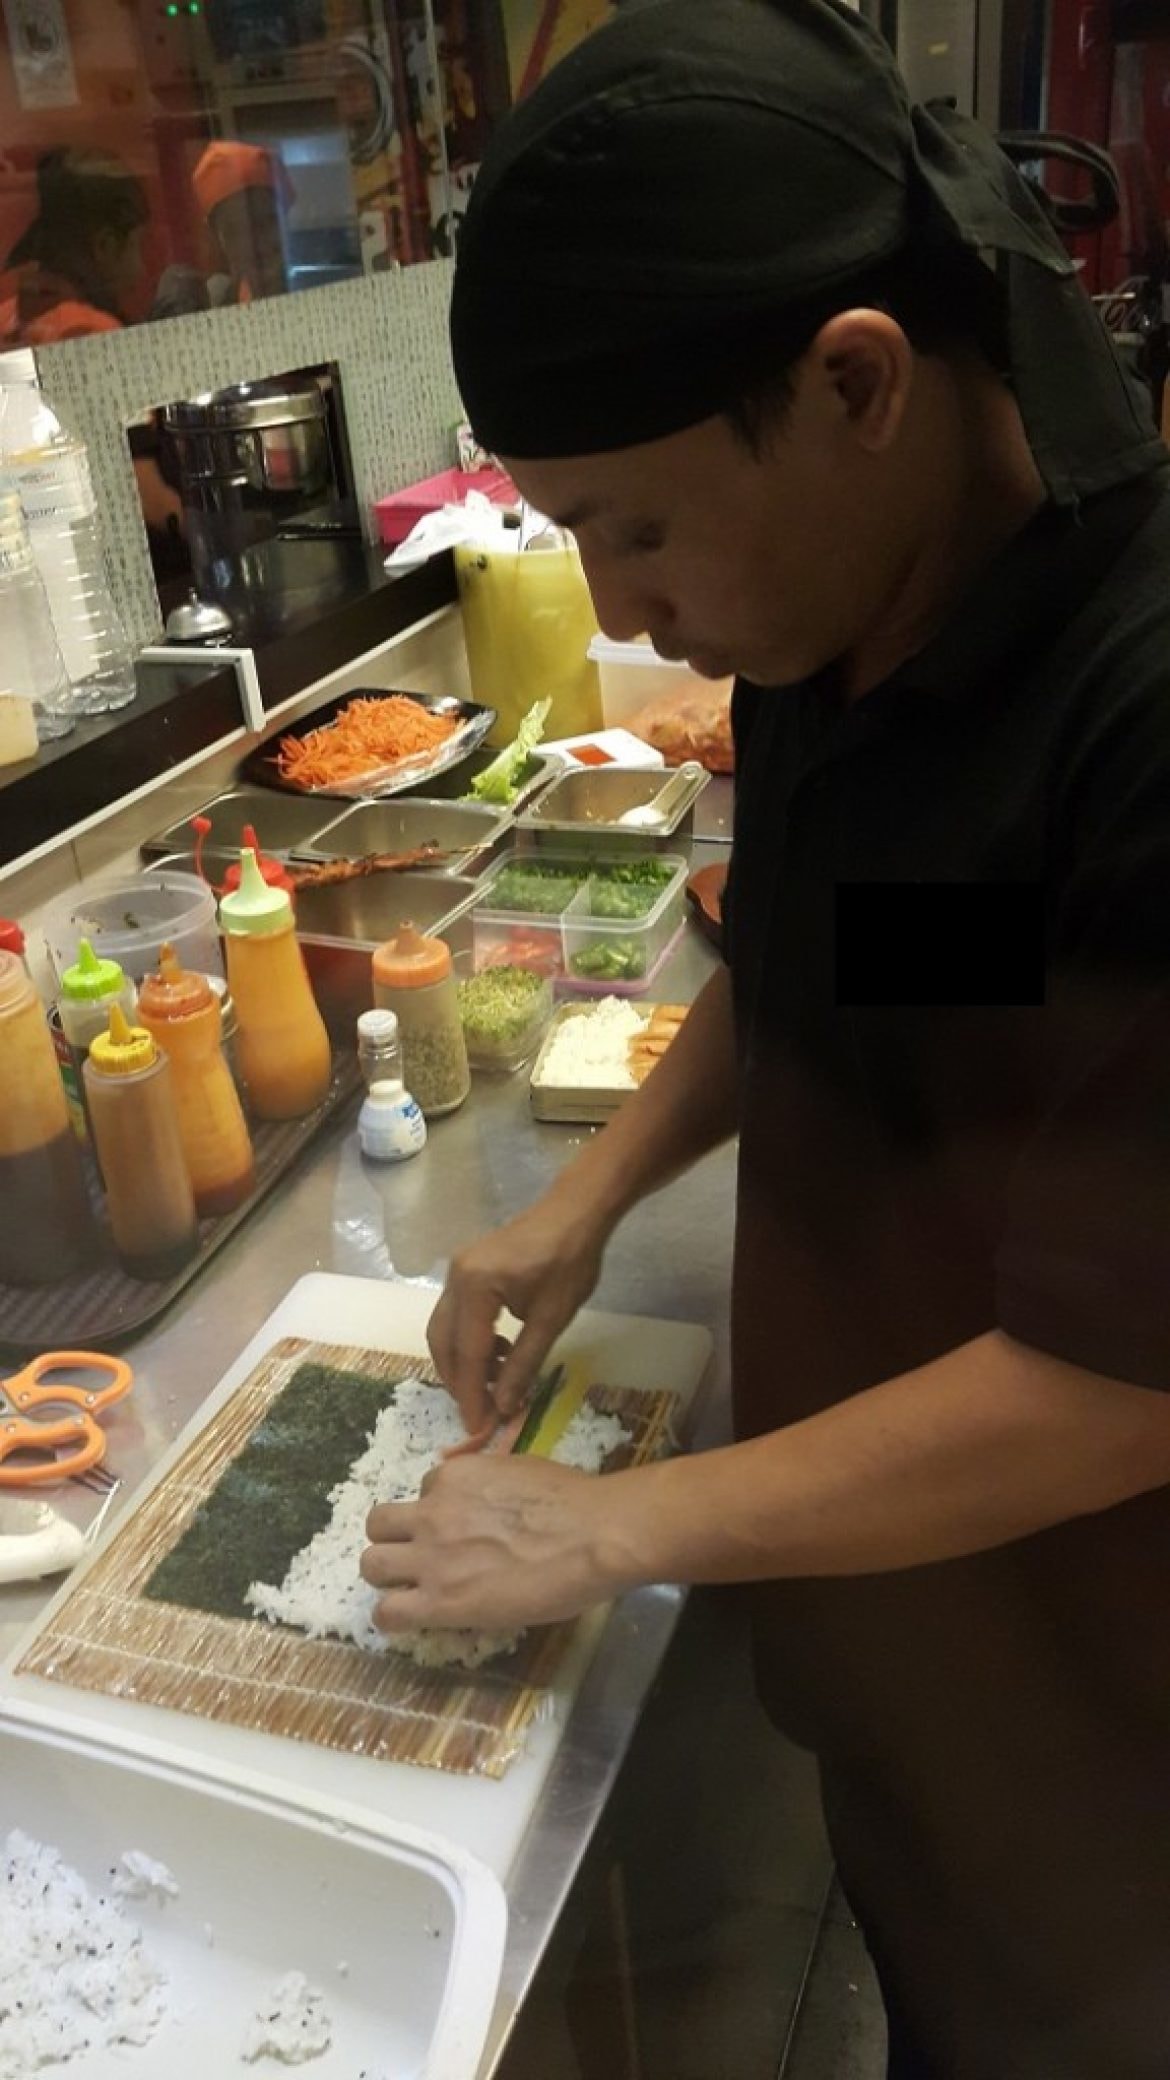 This Sushi Was Made Without Gloves. Would You Eat It - Sales Ninja Blog